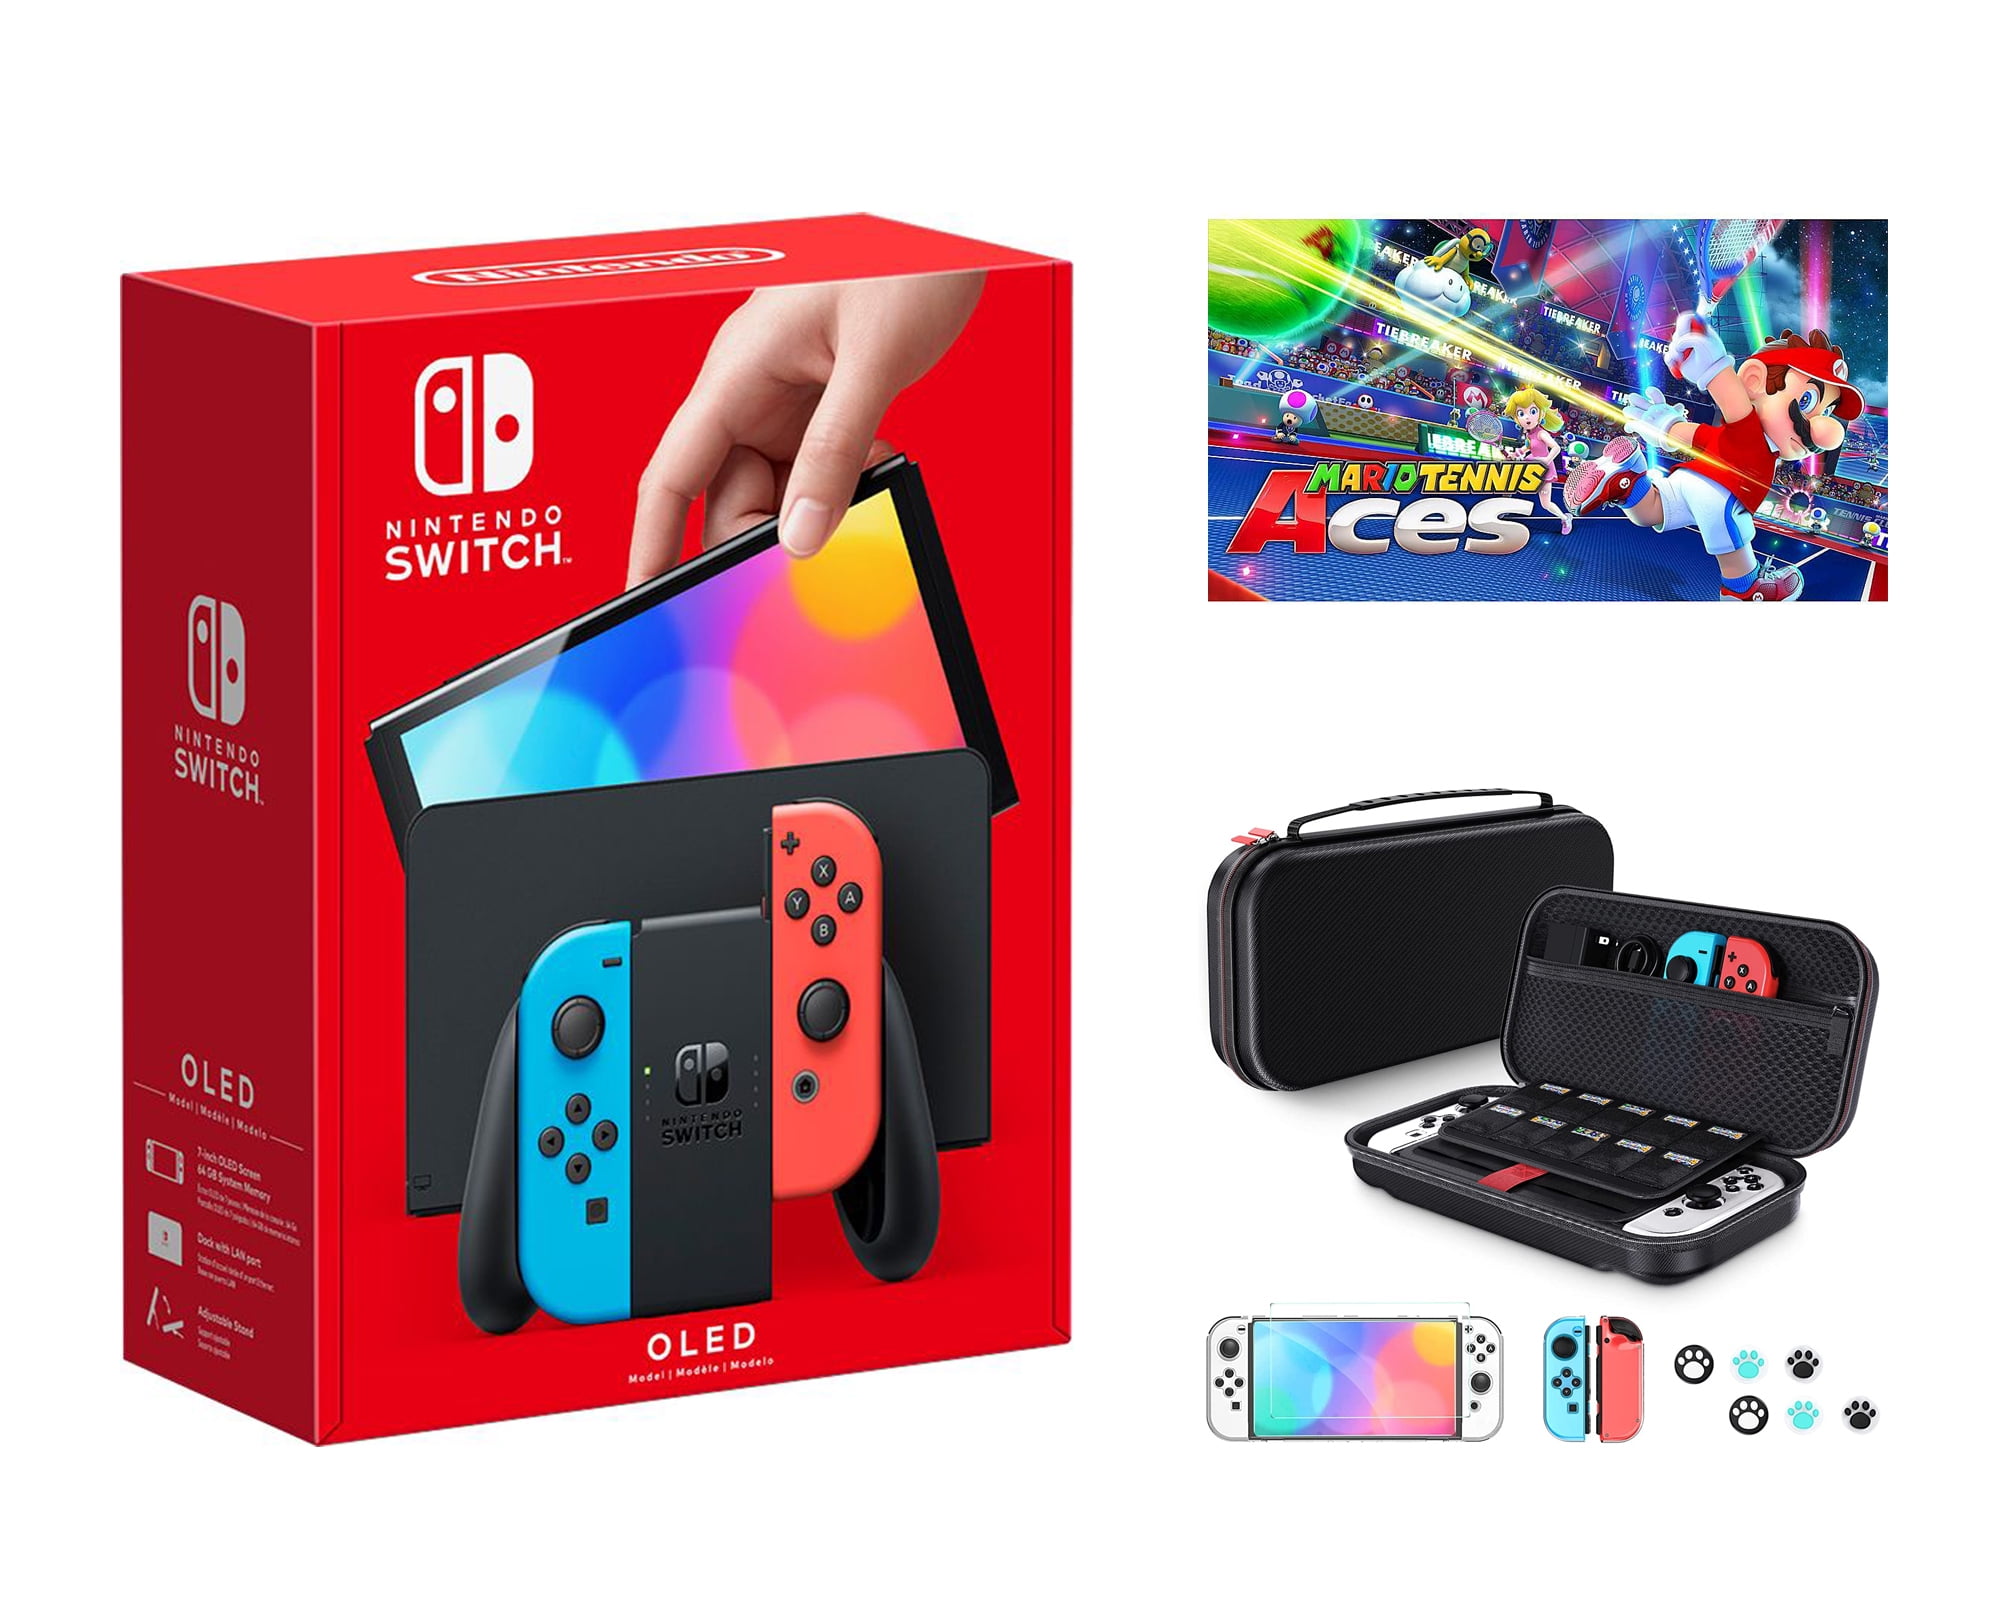 2023 Newest Nintendo Switch OLED Model Neon Red & Blue Joy-Cons Console,  32GB Internal Storage, Bundle with The Legend of Zelda: Breath of the Wild  & 